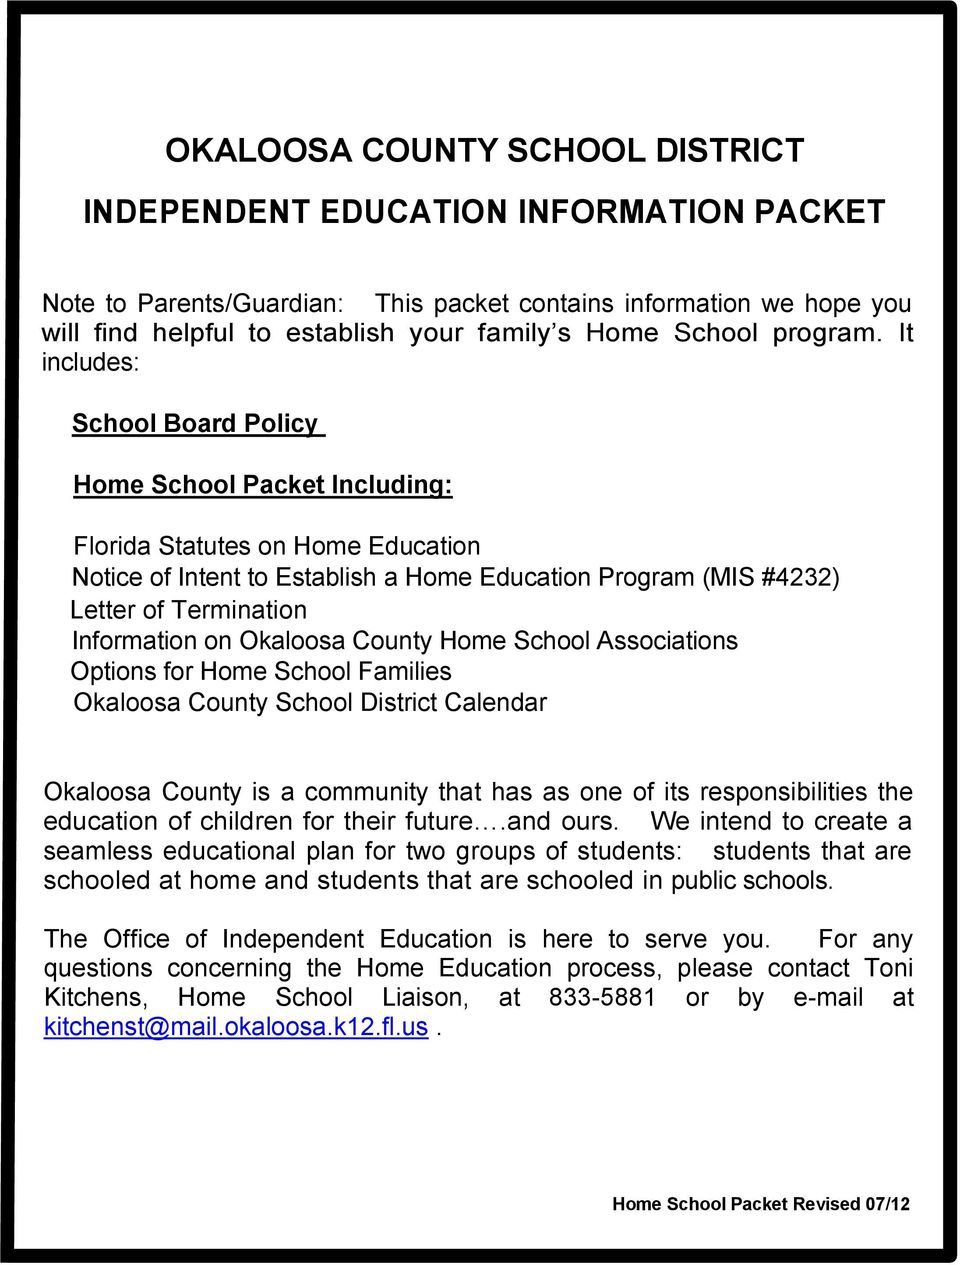 It includes: School Board Policy Home School Packet Including: Florida Statutes on Home Education Notice of Intent to Establish a Home Education Program (MIS #4232) Letter of Termination Information